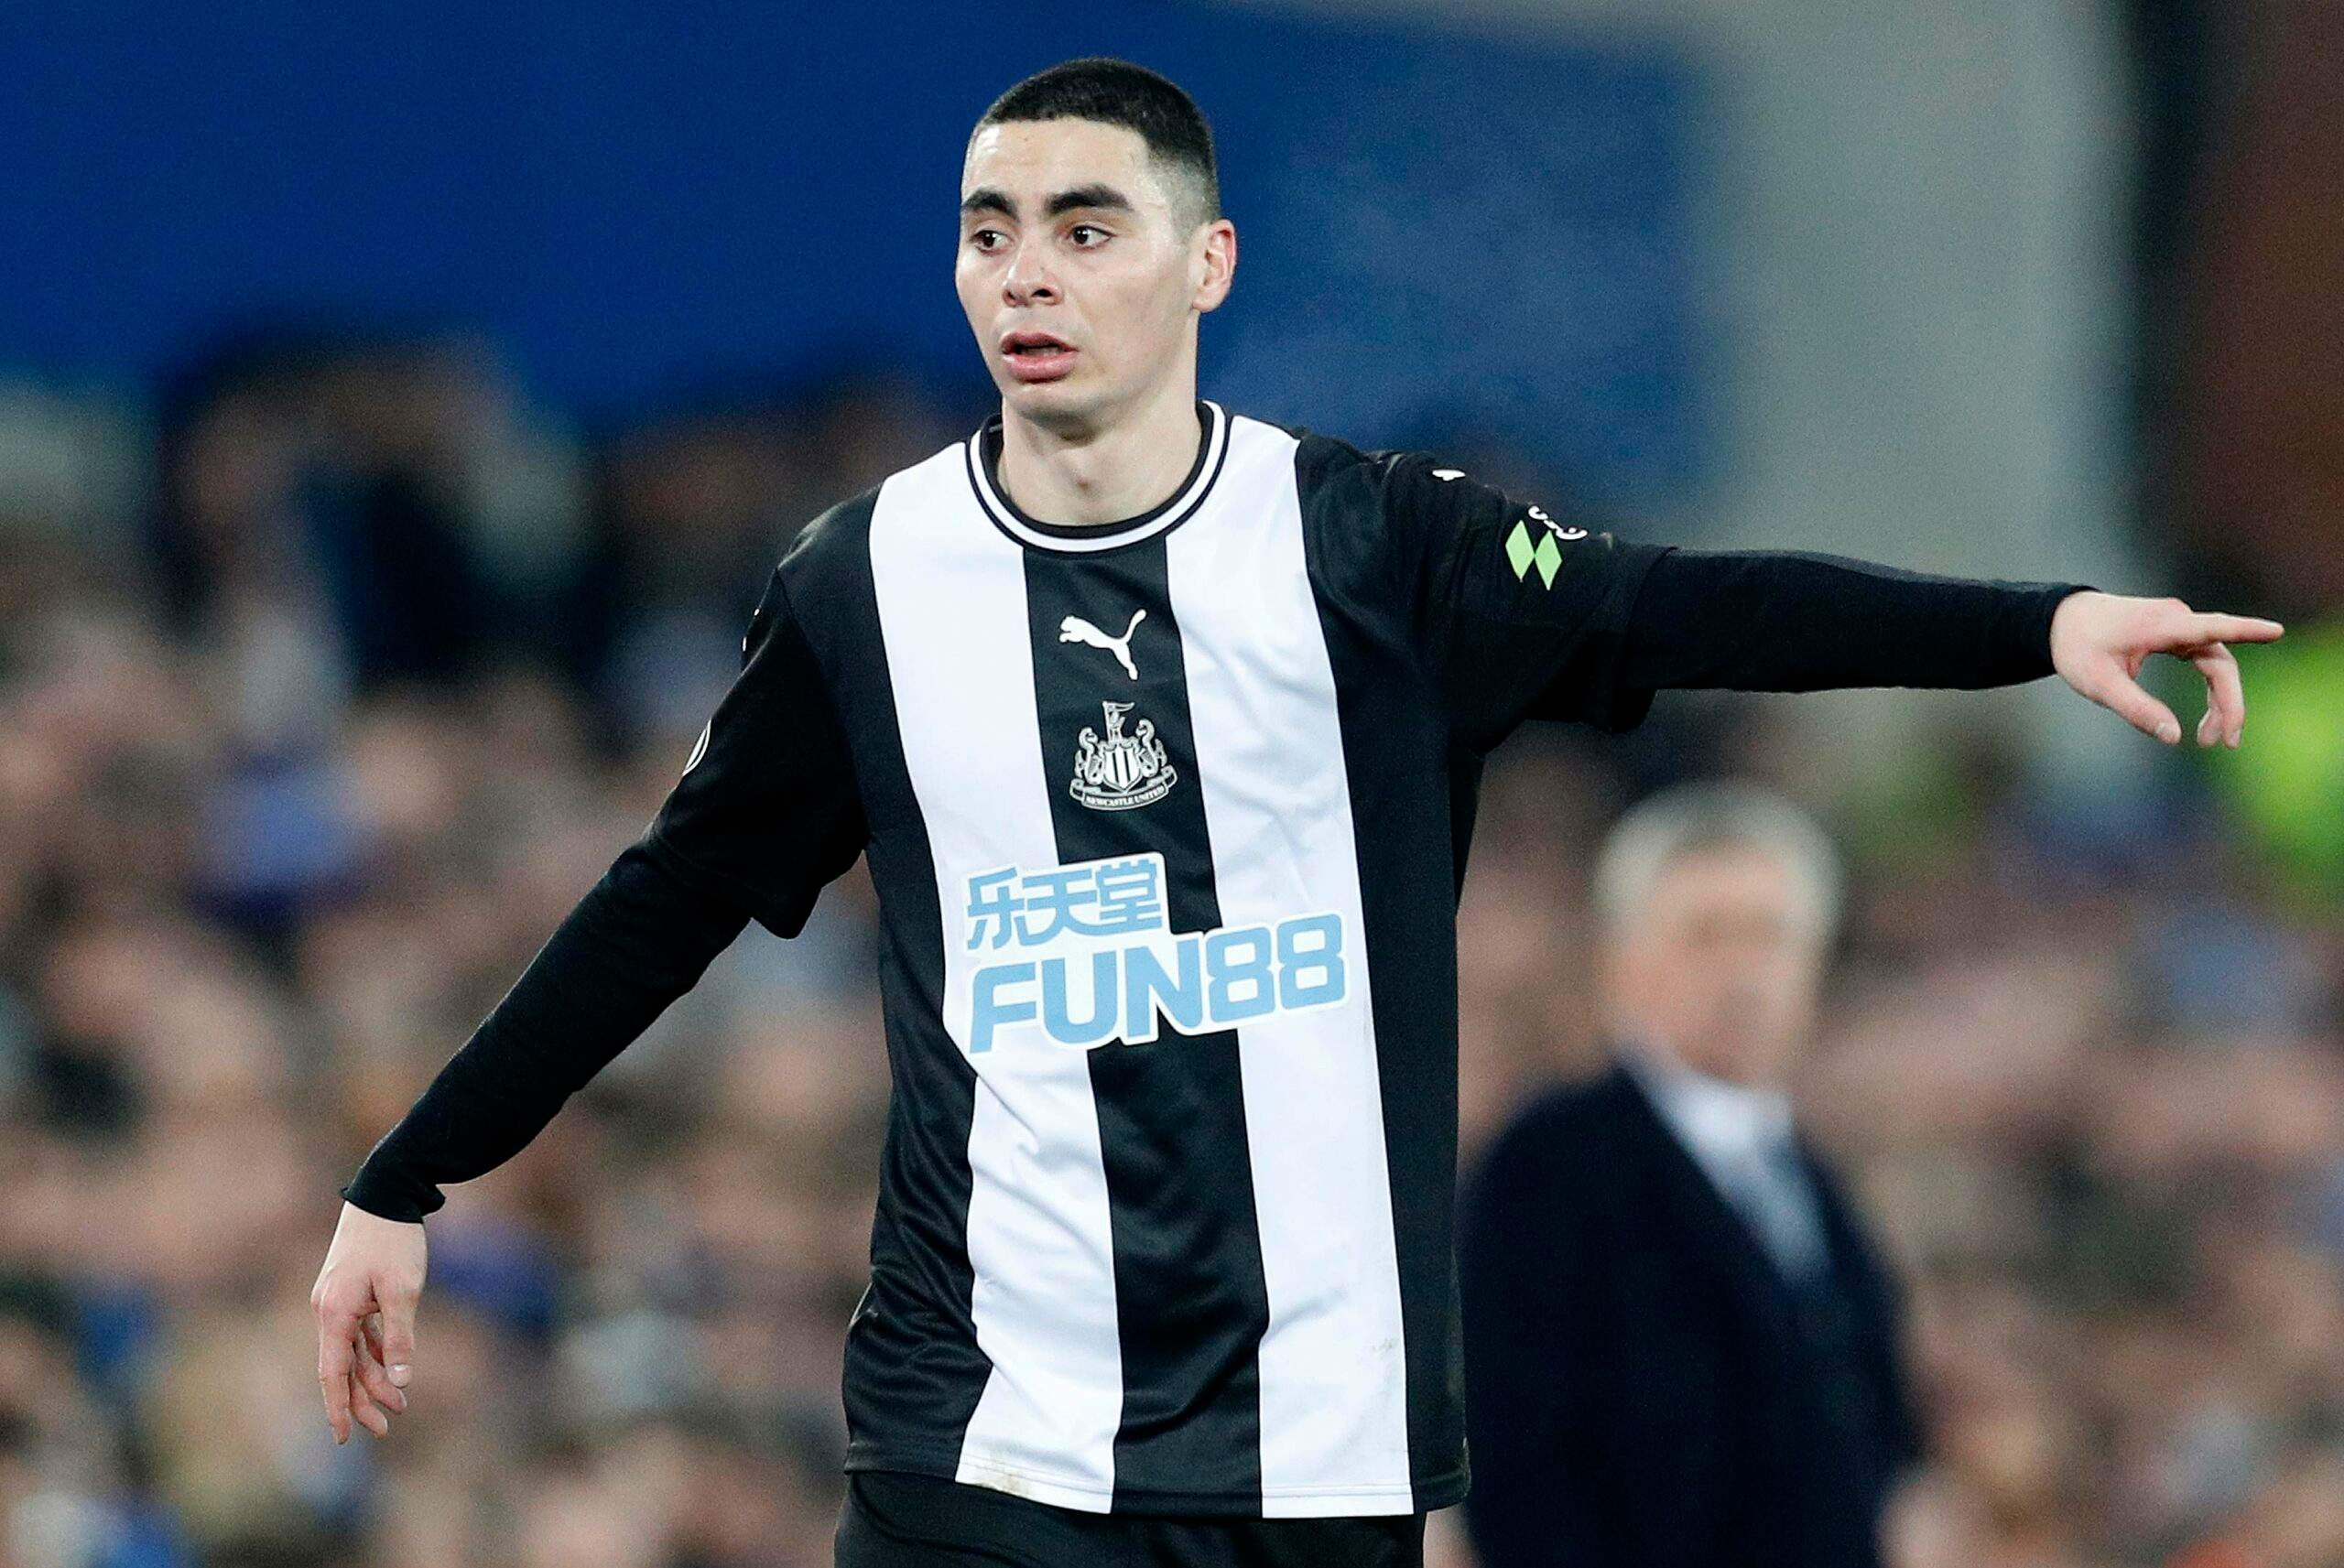 January 21, 2020, Liverpool, United Kingdom: Miguel Almiron of Newcastle United during the Premier League match against Everton at Goodison Park, Liverpool. Picture date: 21st January 2020. Picture credit should read: Darren Staples/Sportimage(Credit Image: © Darren Staples/CSM via ZUMA Wire)LIGA ANGIELSKA PILKA NOZNA SEZON 2019/2020 FOT. ZUMA/NEWSPIX.PL POLAND ONLY! --- Newspix.pl *** Local Caption *** www.newspix.pl mail us: info@newspix.pl call us: 0048 022 23 22 222 --- Polish Picture Agency by Ringier Axel Springer Poland